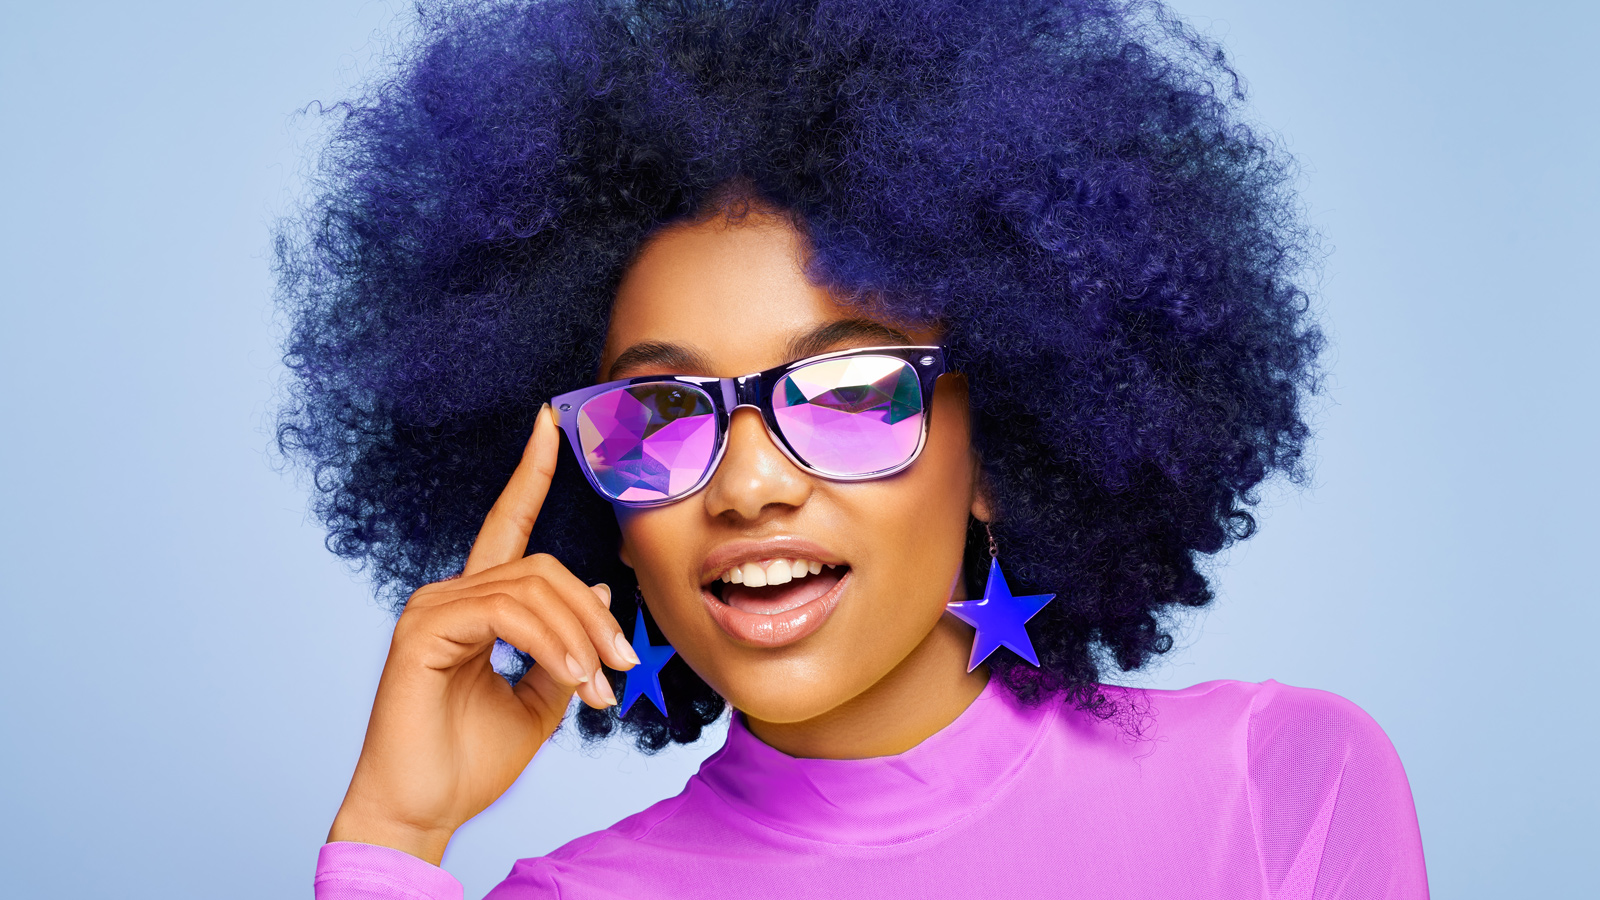 Beauty portrait of African American girl in colored sunglasses